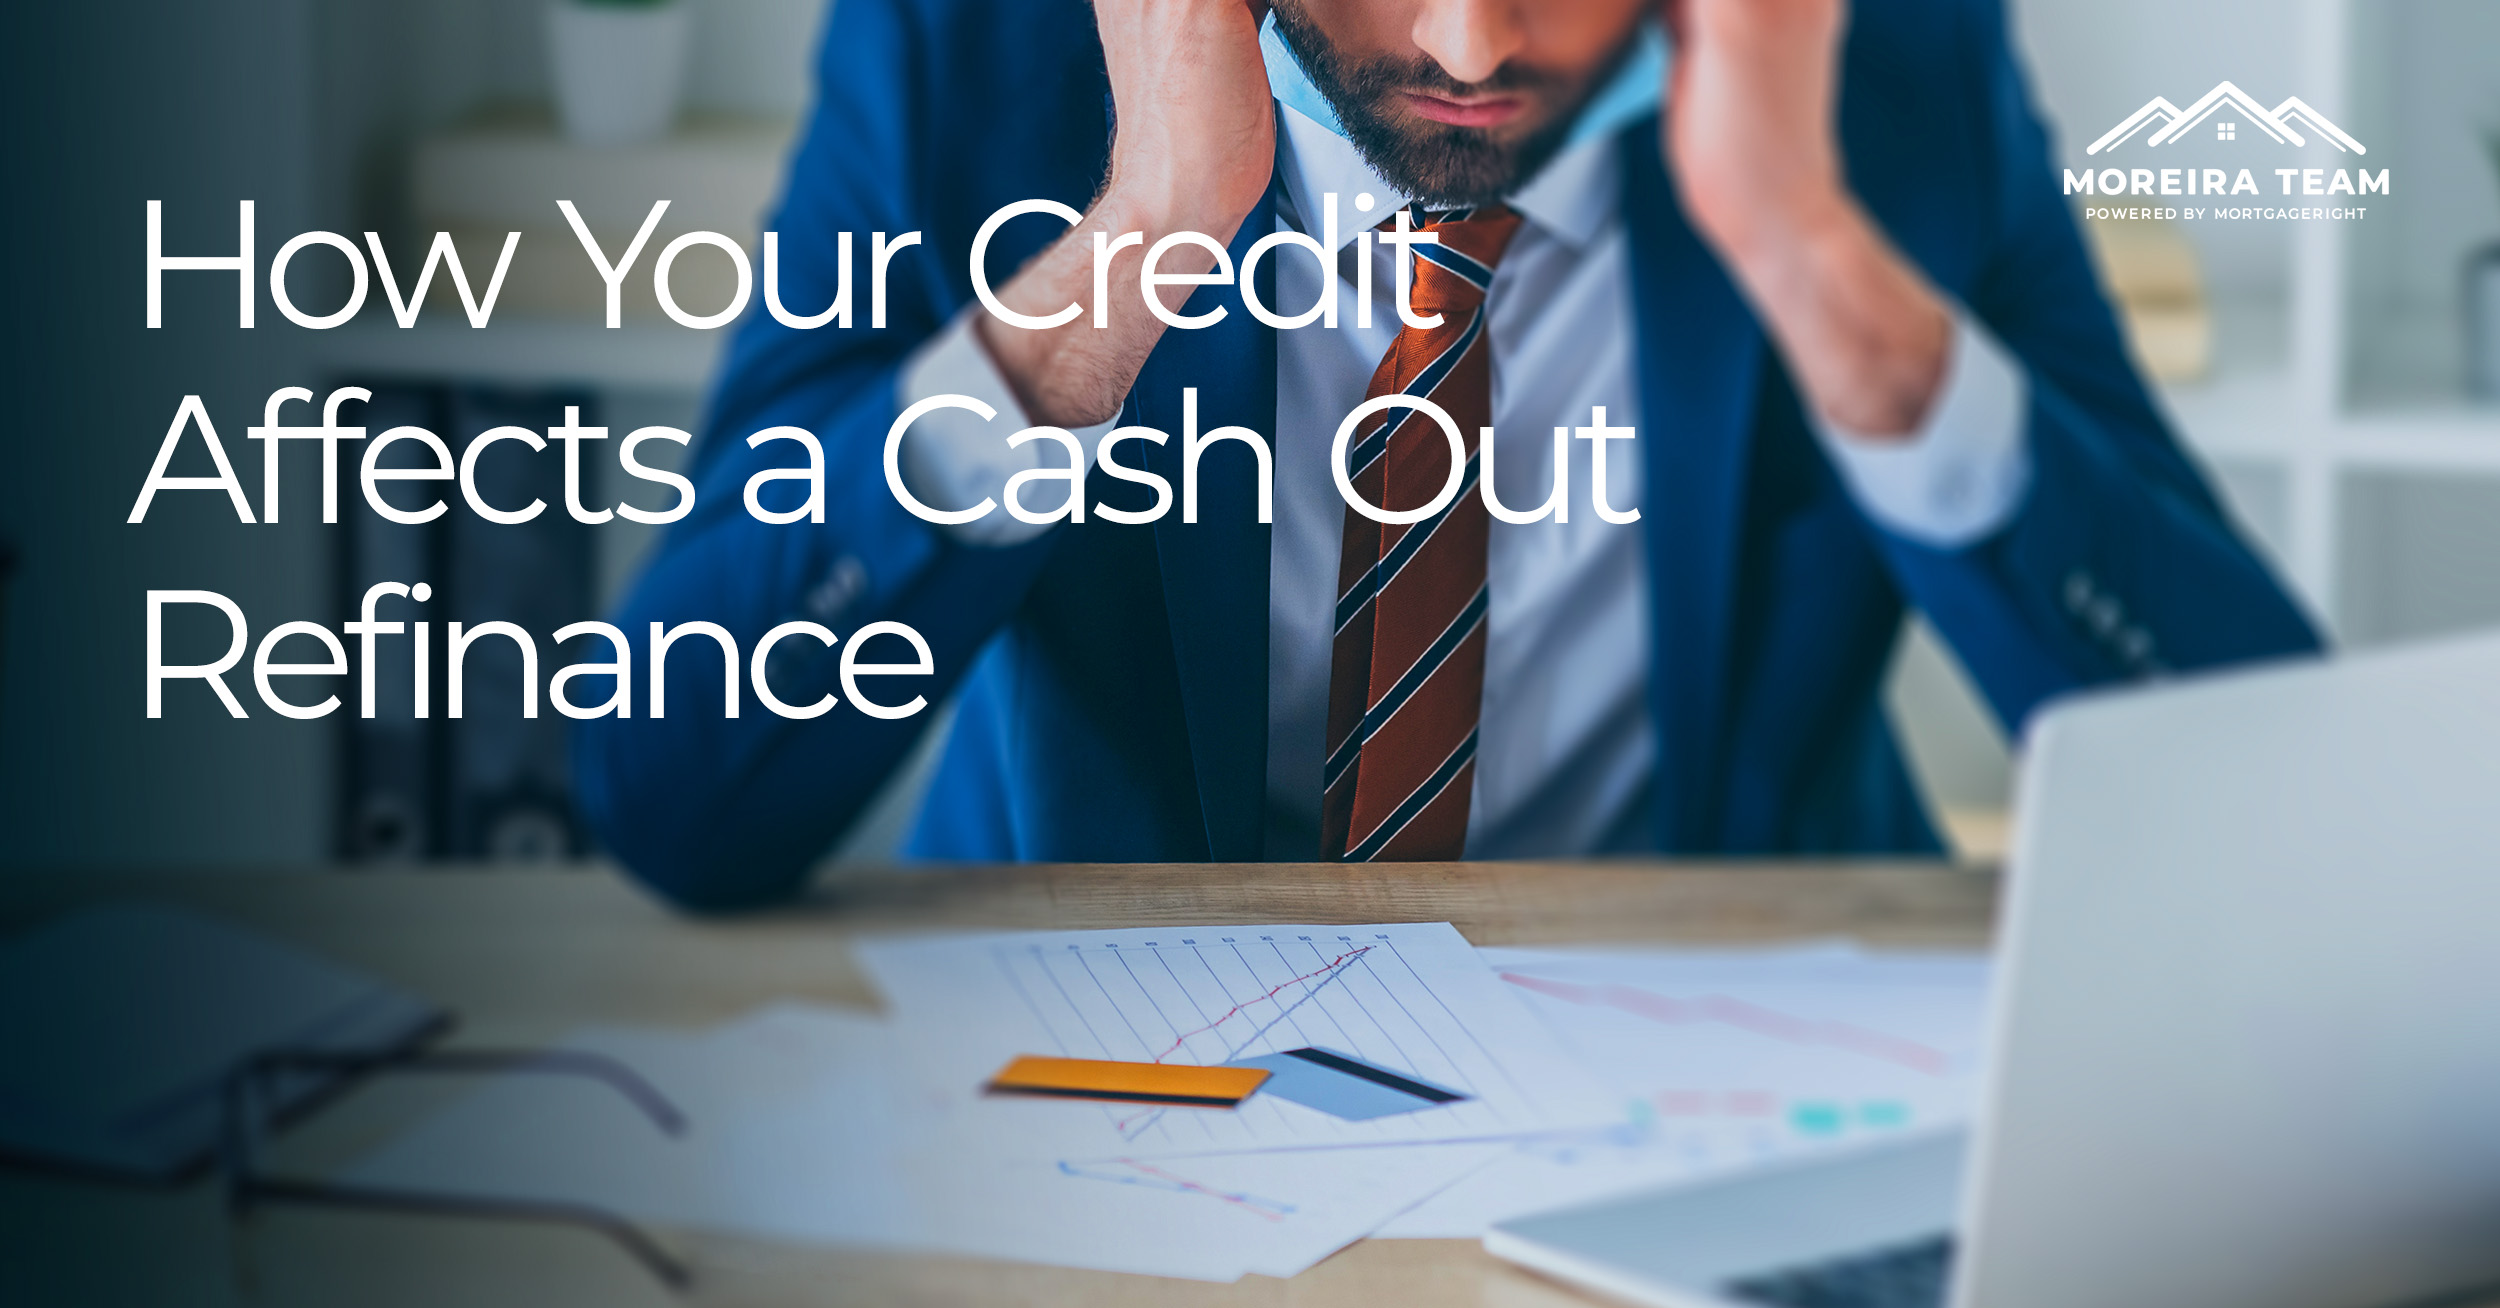 How your credit affects a cashout refinance